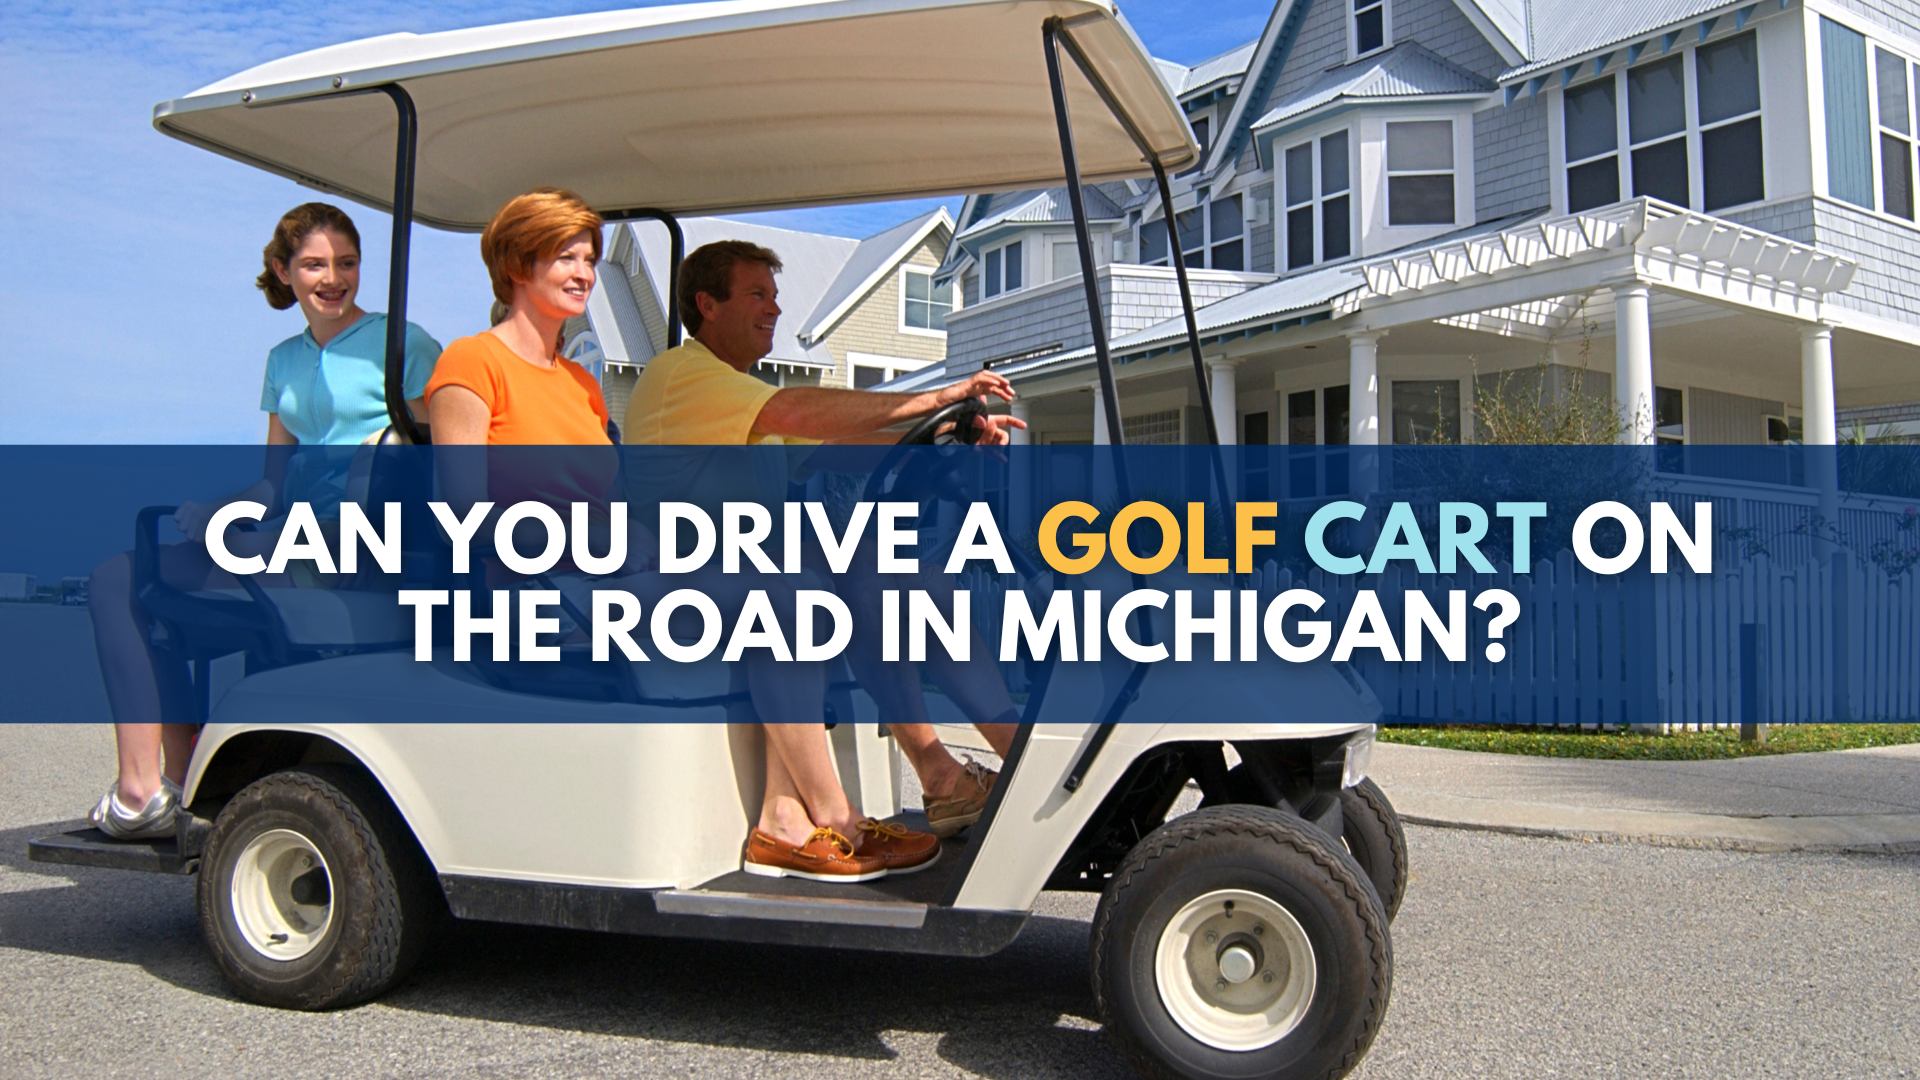 Can you drive a golf cart on the road in Michigan?